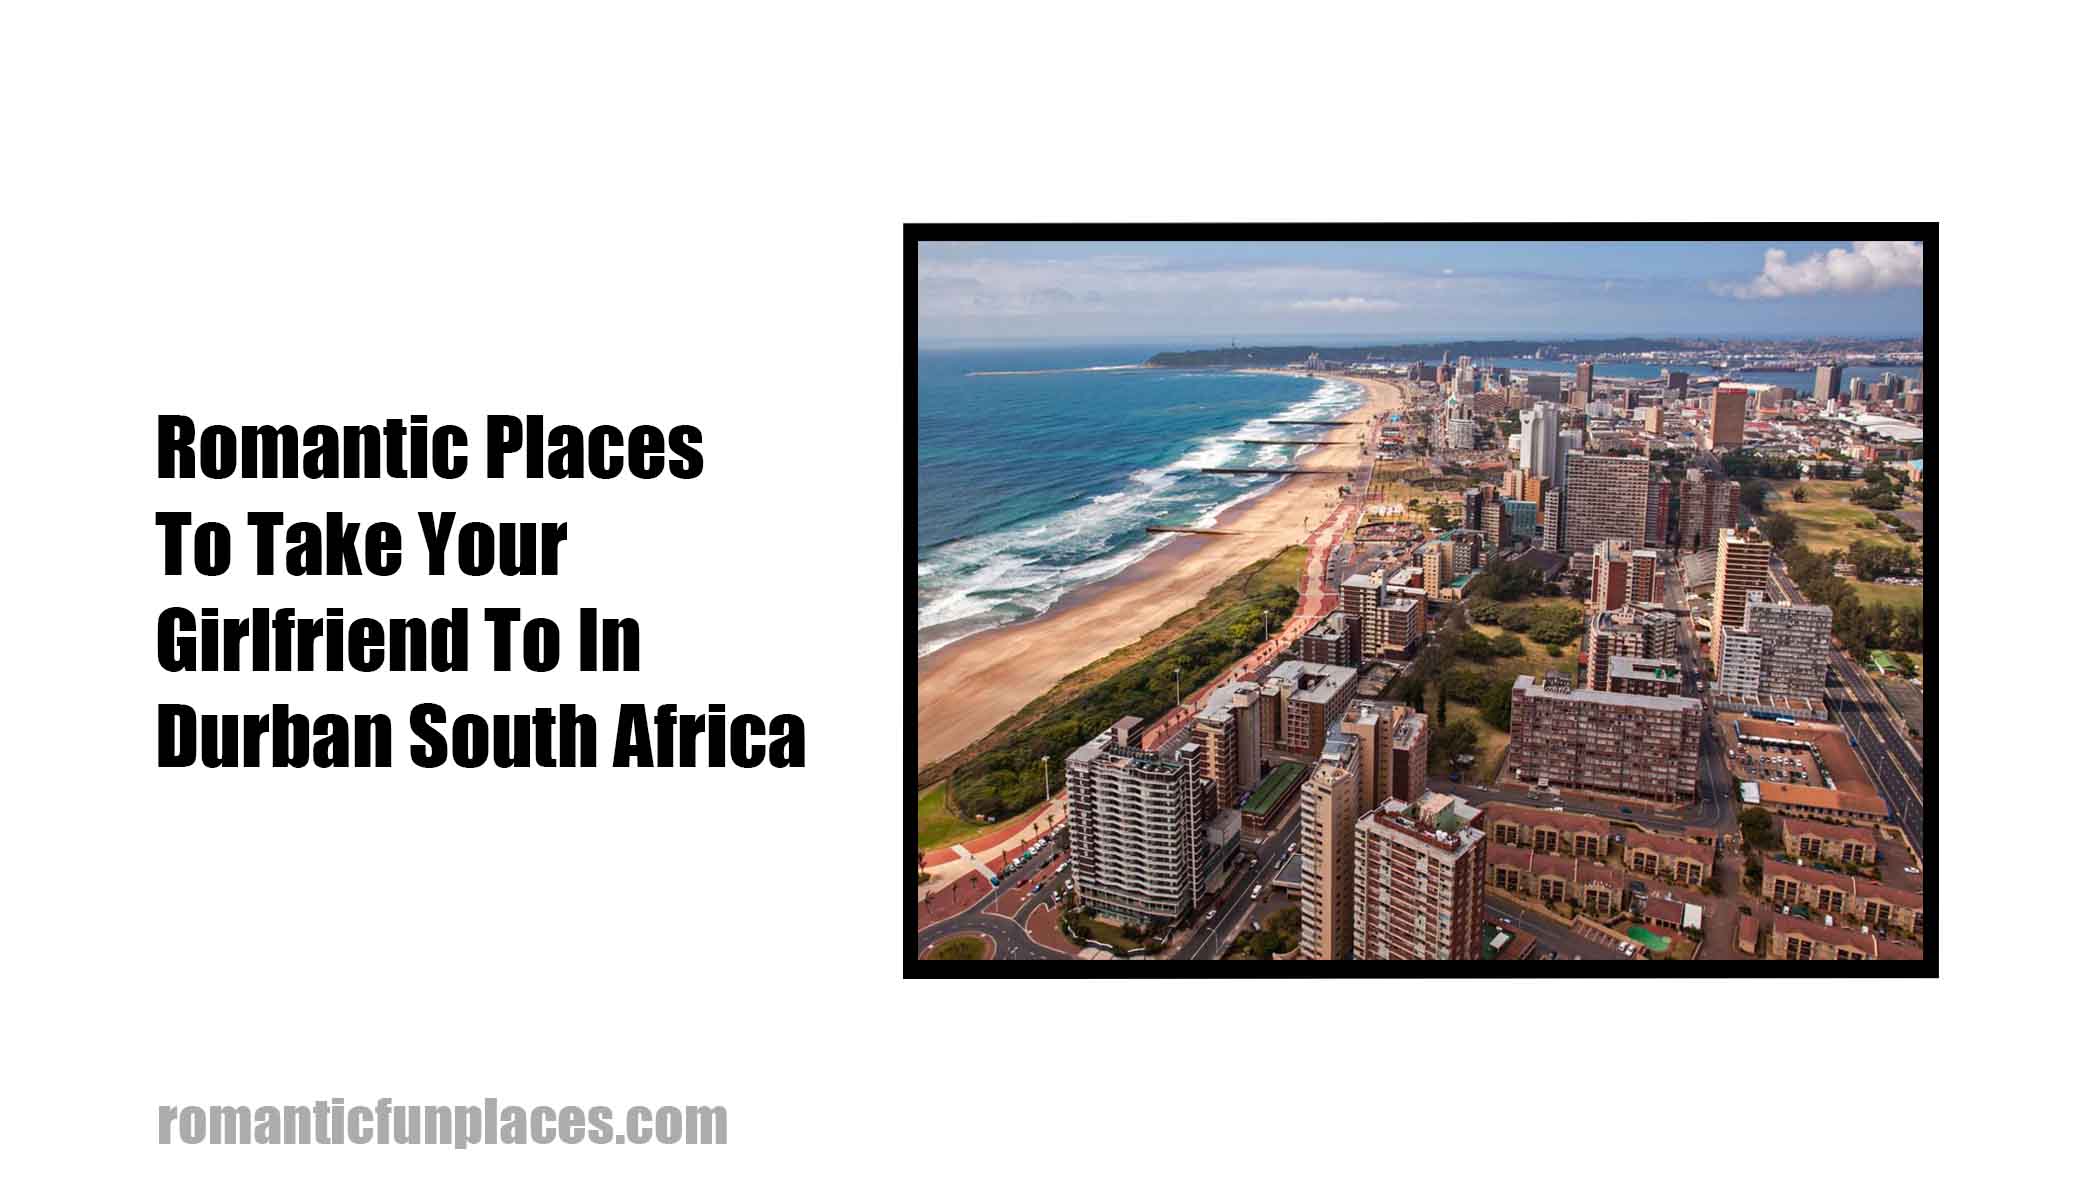 Romantic Places To Take Your Girlfriend To In Durban South Africa